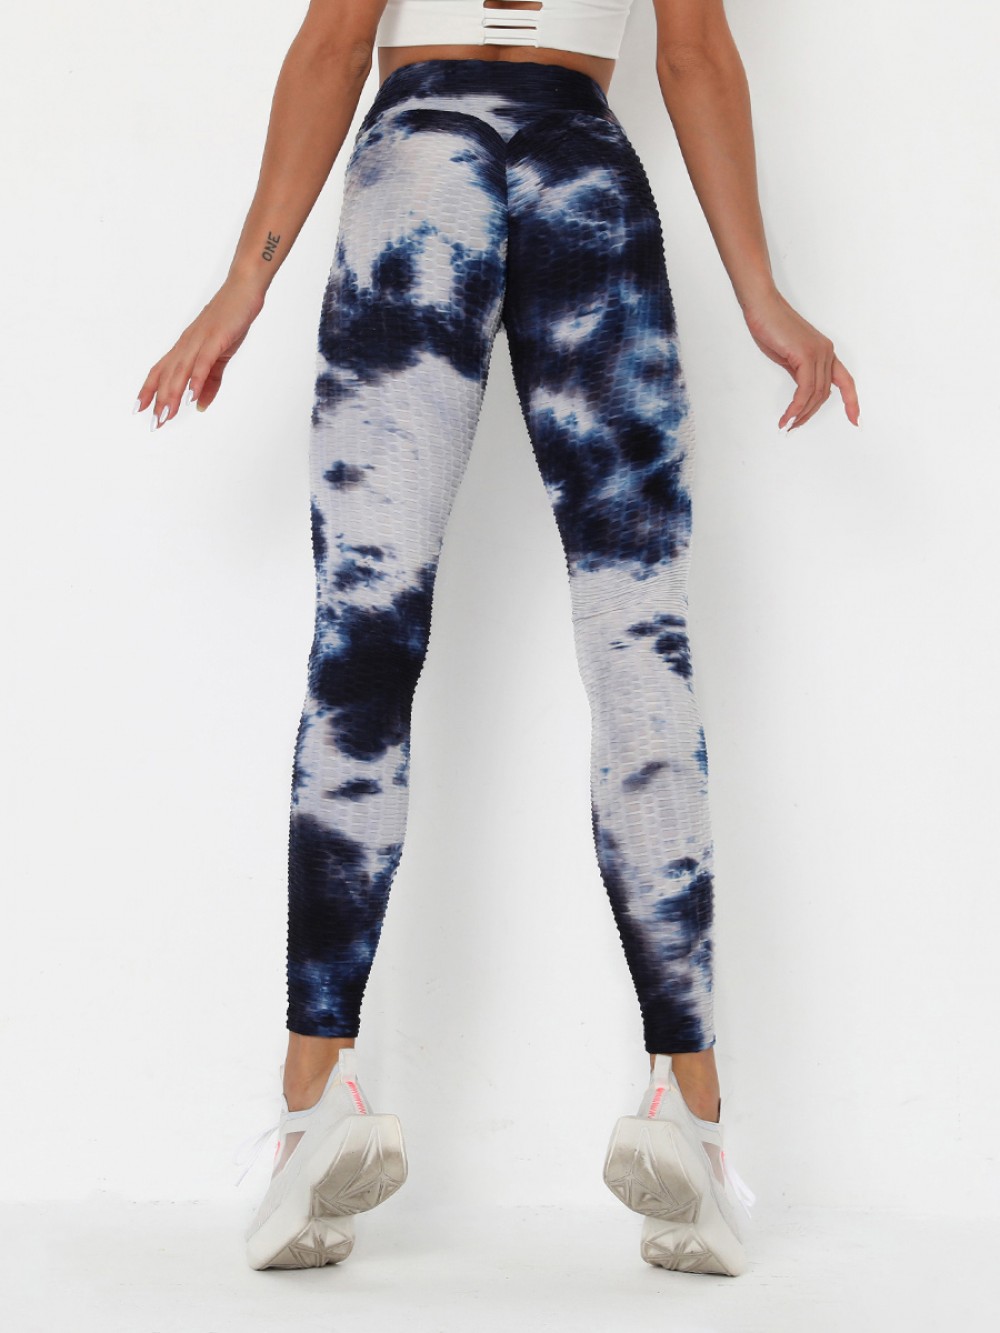 Deep Blue Tie-Dyed Womens Gym Leggings Ankle Length Slimming Fit